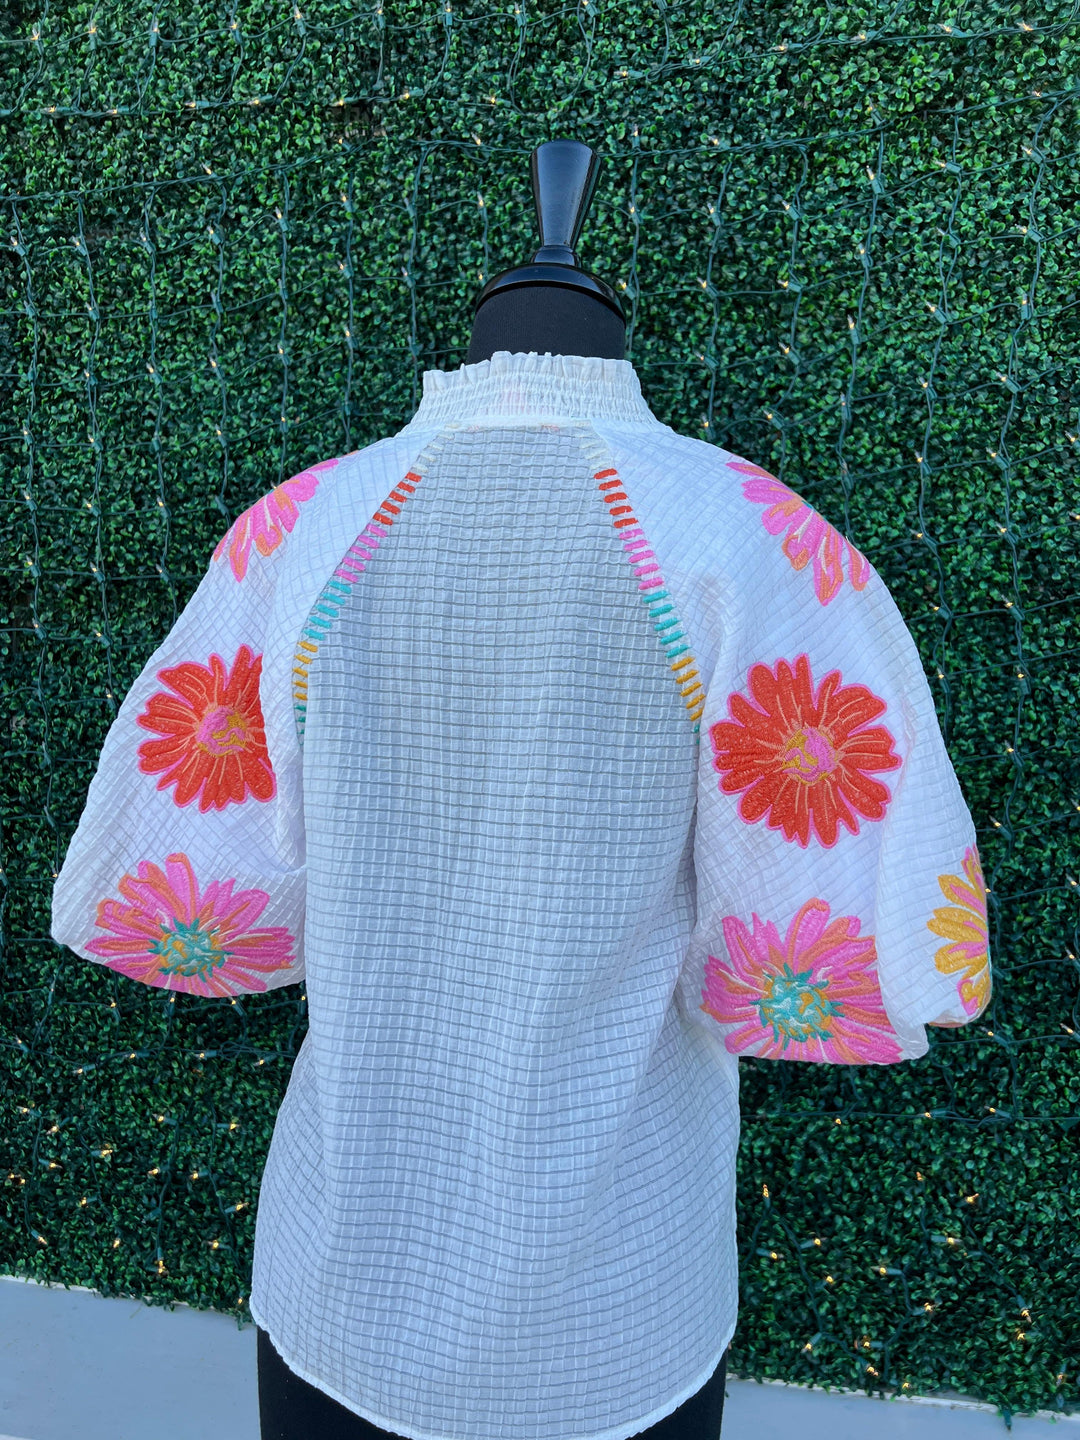 THML Spring embroidered blouse with big colorful flowers on sleeves online boutique